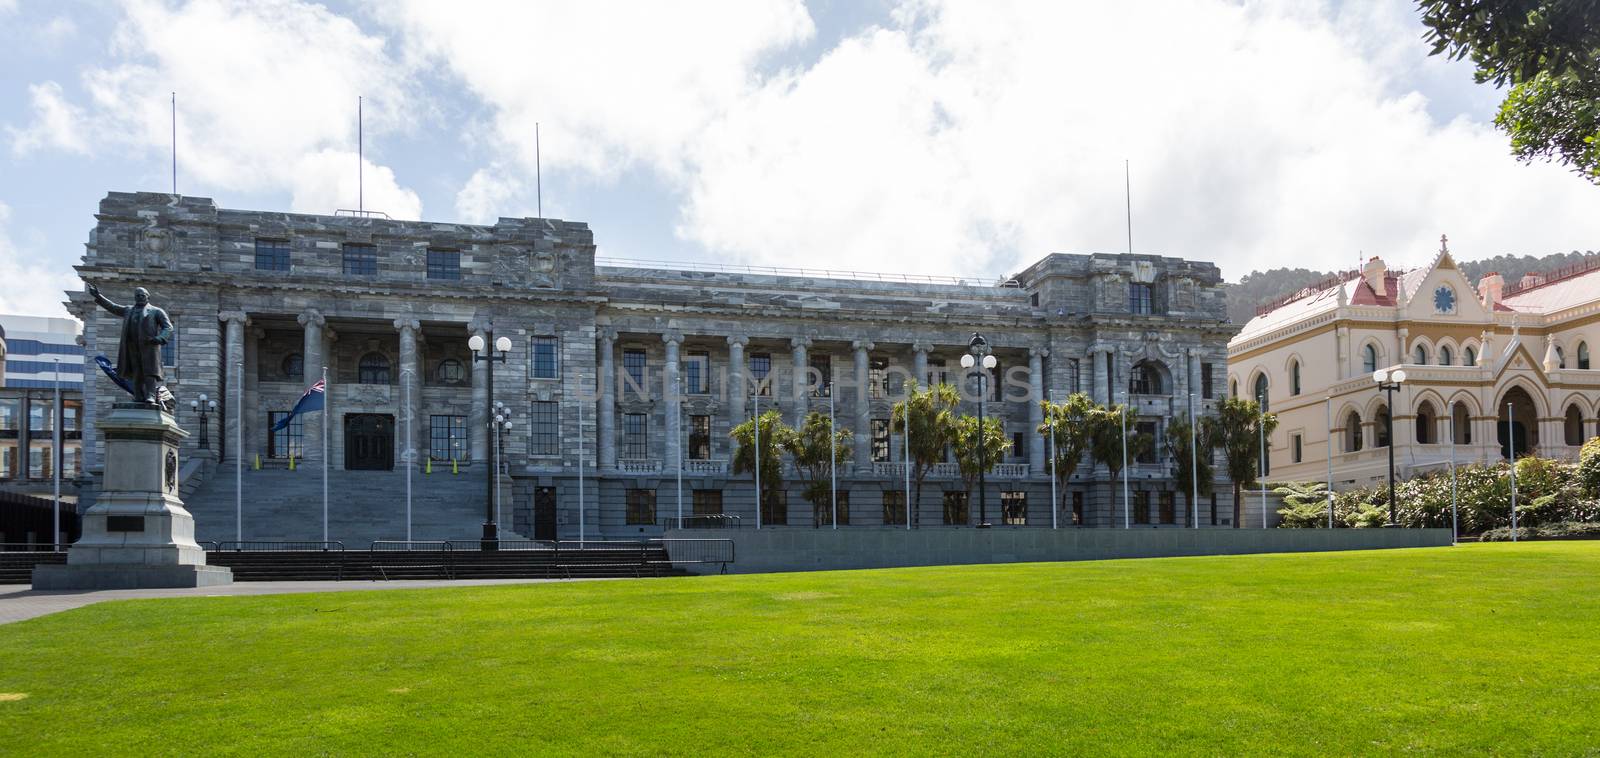 New Zealand Parliament government buildings in Wellington with Parliament House adn Parliamentary Library